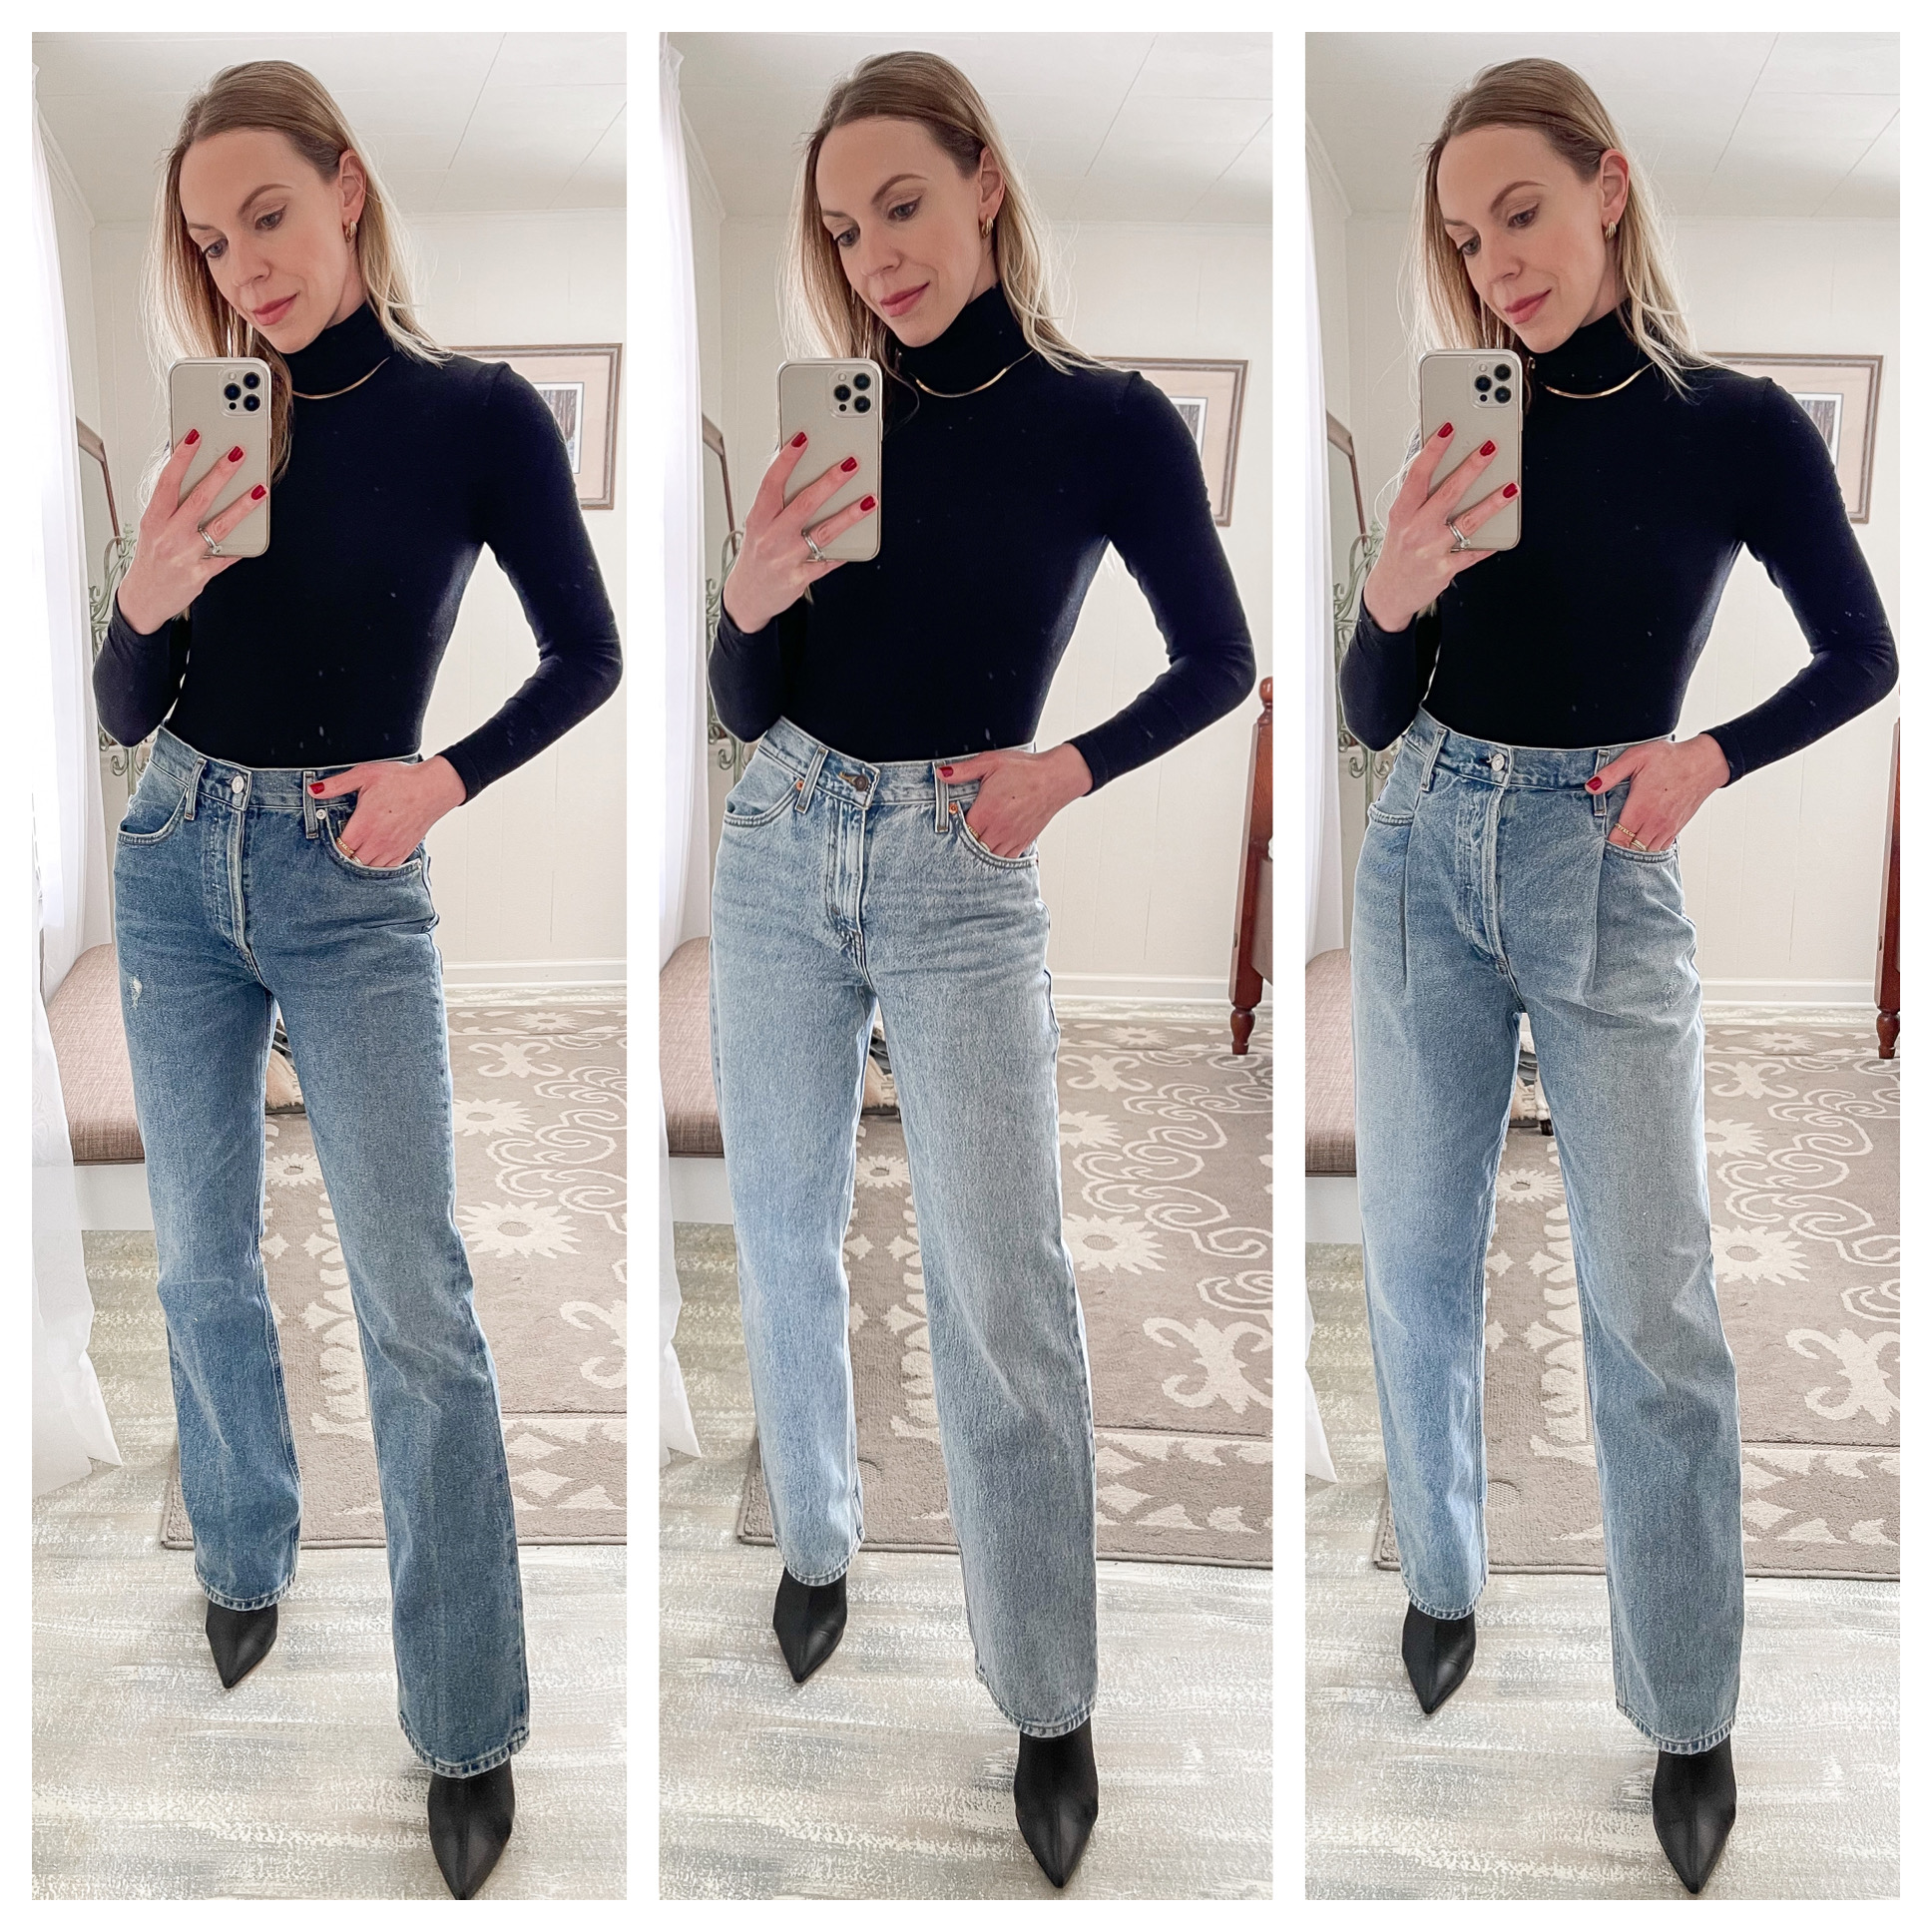 3 New Pairs of Jeans I'm Loving & Key Denim Trends for Spring 2022